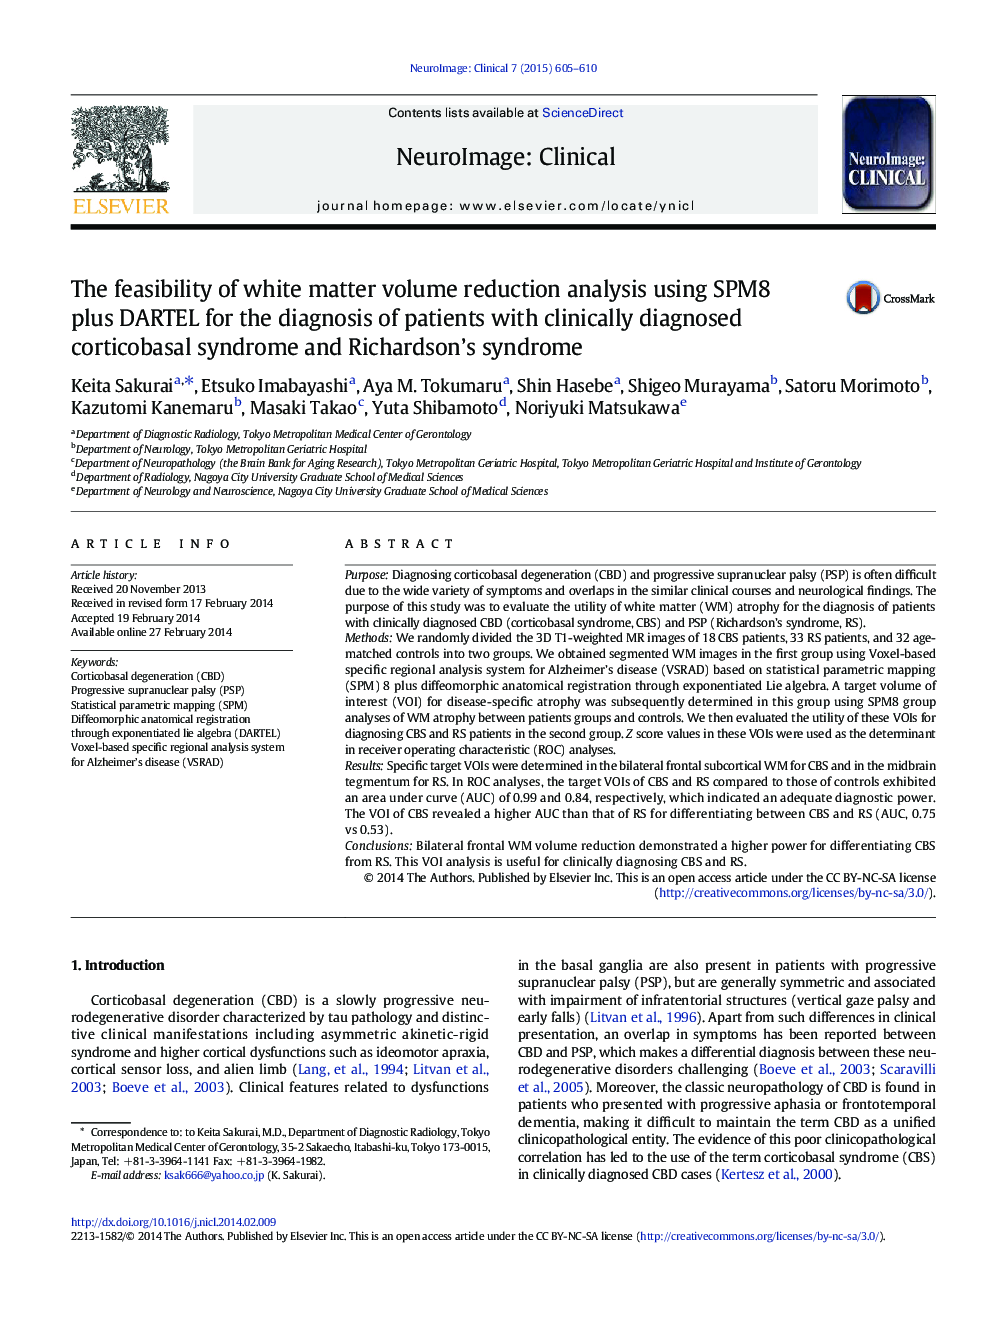 The feasibility of white matter volume reduction analysis using SPM8 plus DARTEL for the diagnosis of patients with clinically diagnosed corticobasal syndrome and Richardson’s syndrome